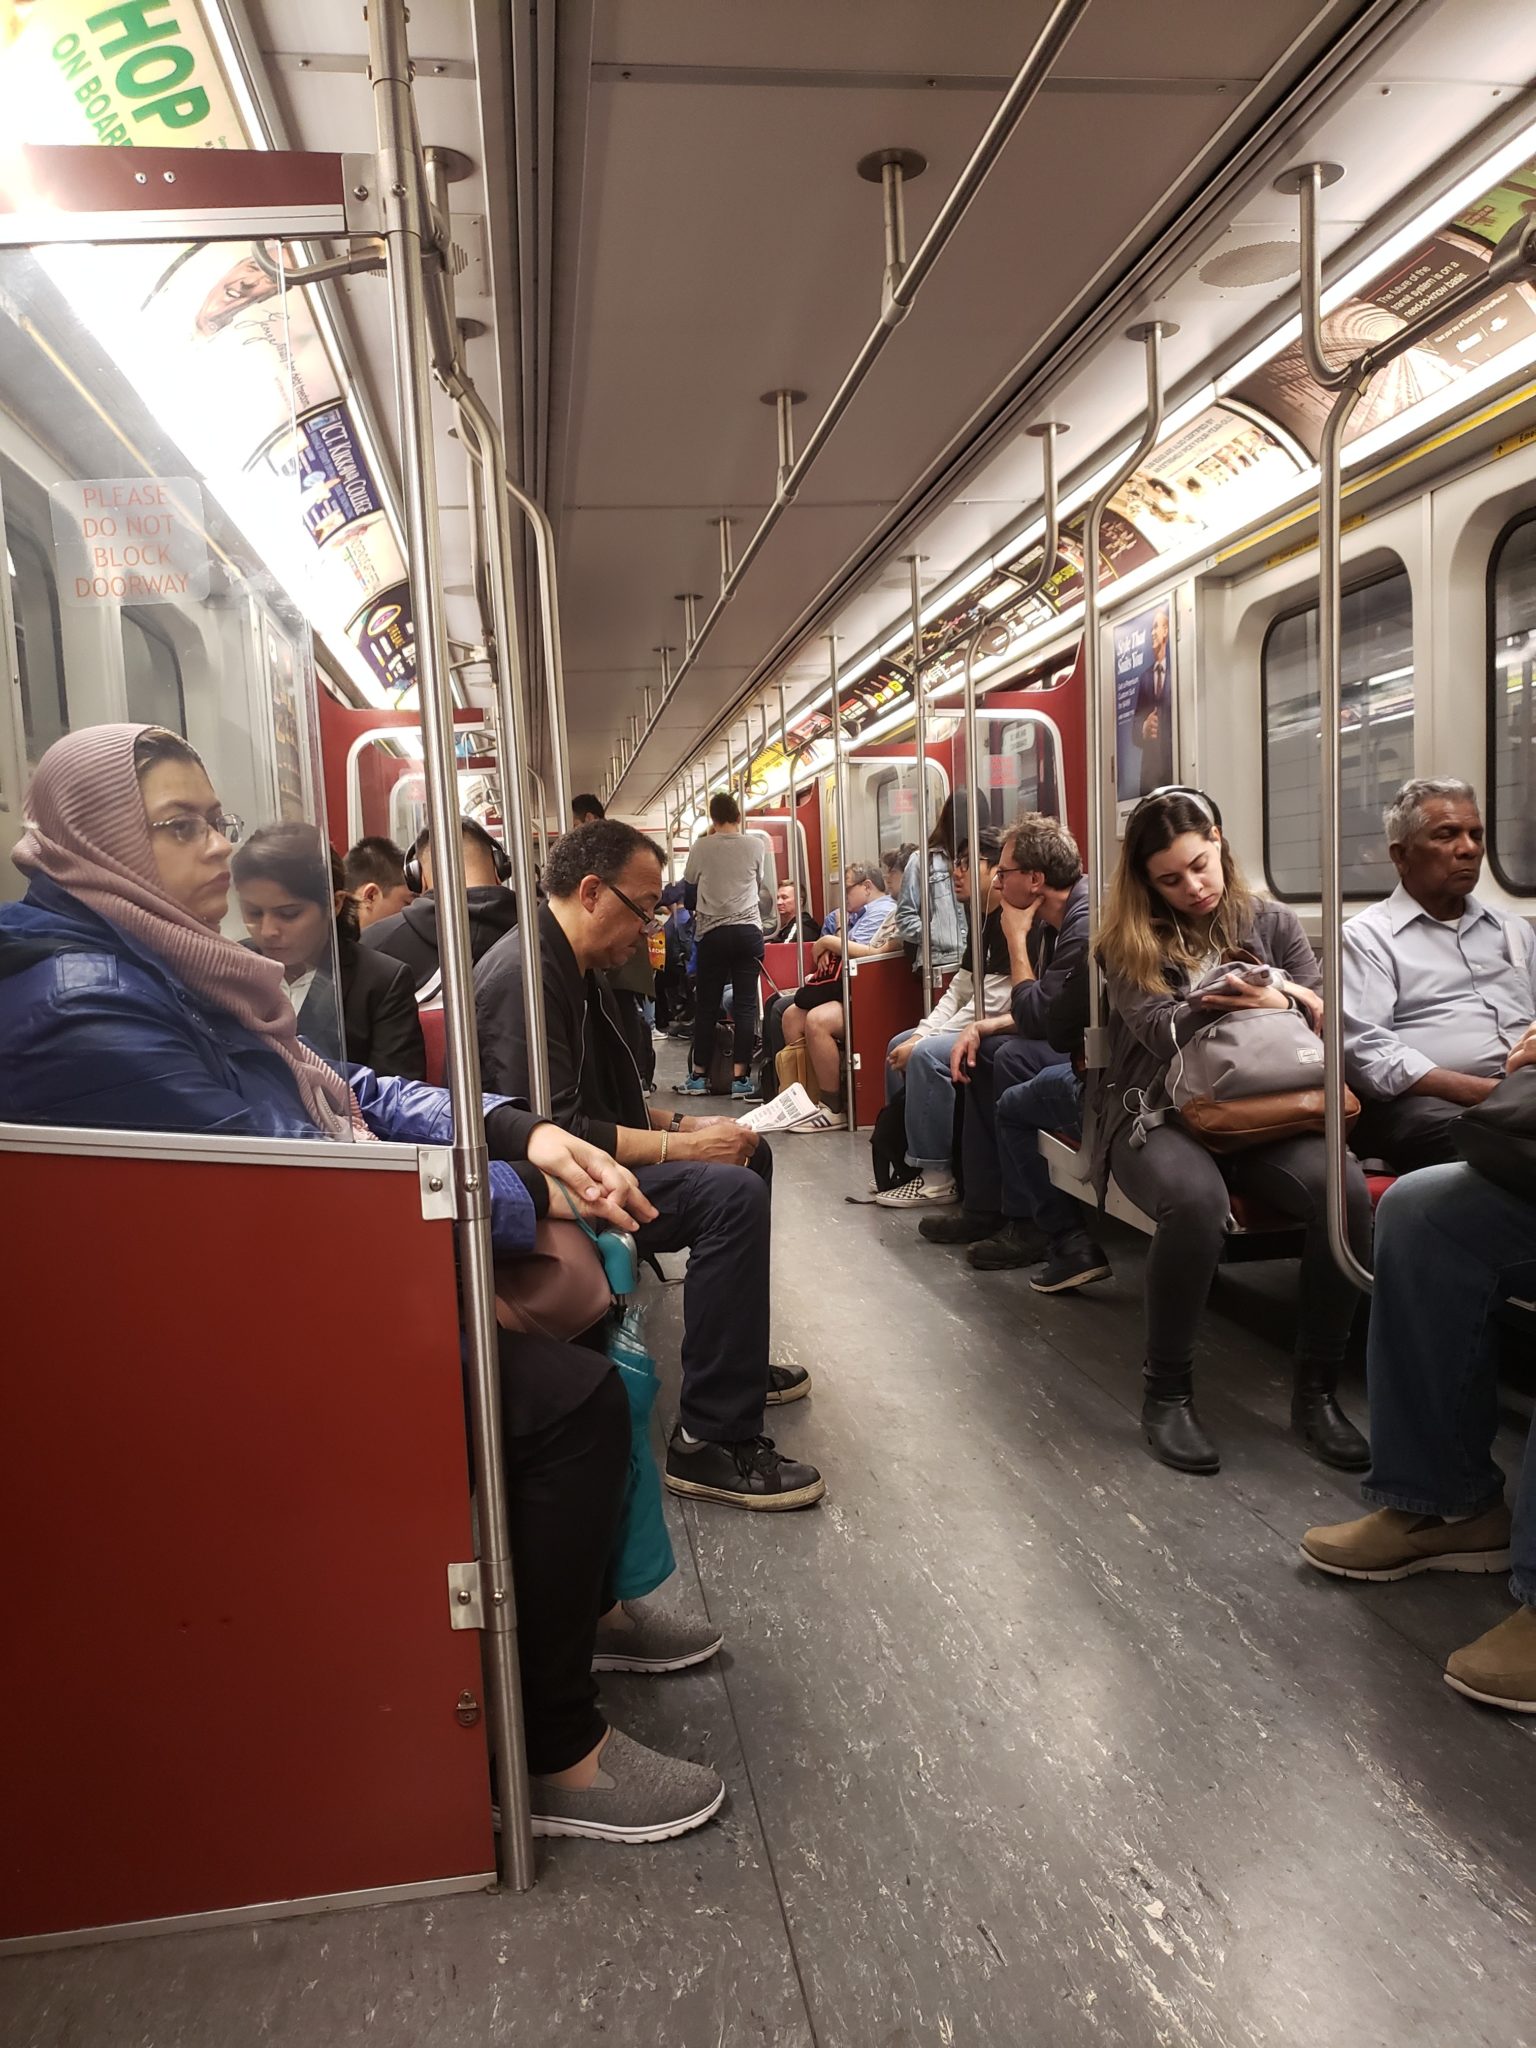 a group of people sitting on a subway car